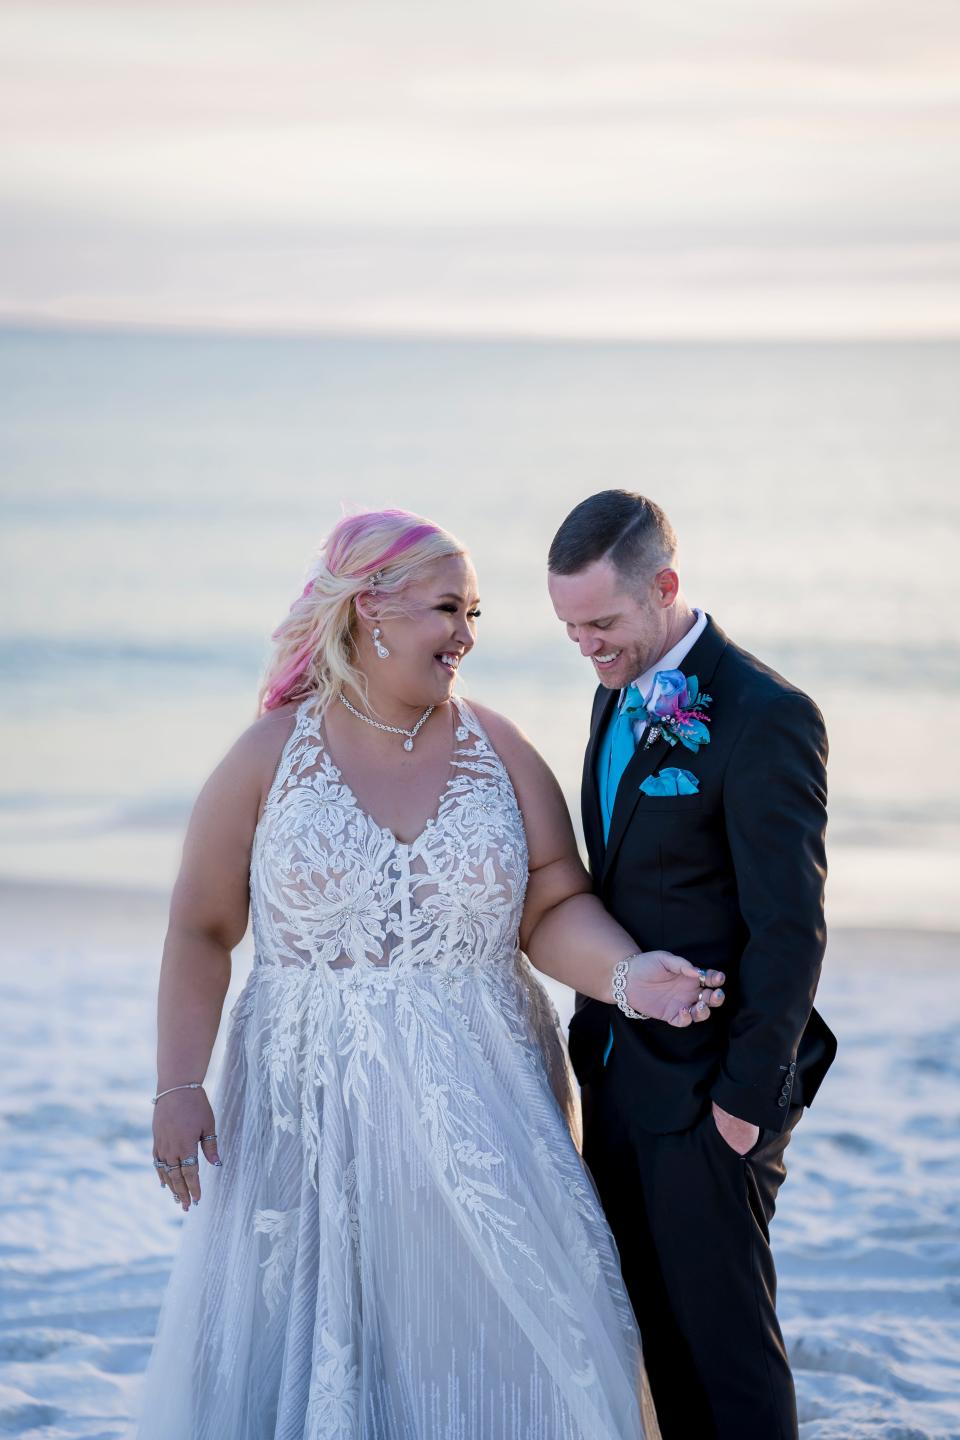 After getting married last March, Mama June Shannon, left, and husband Justin Stroud took their love down the aisle in an "intimate" ceremony in Florida on Saturday.